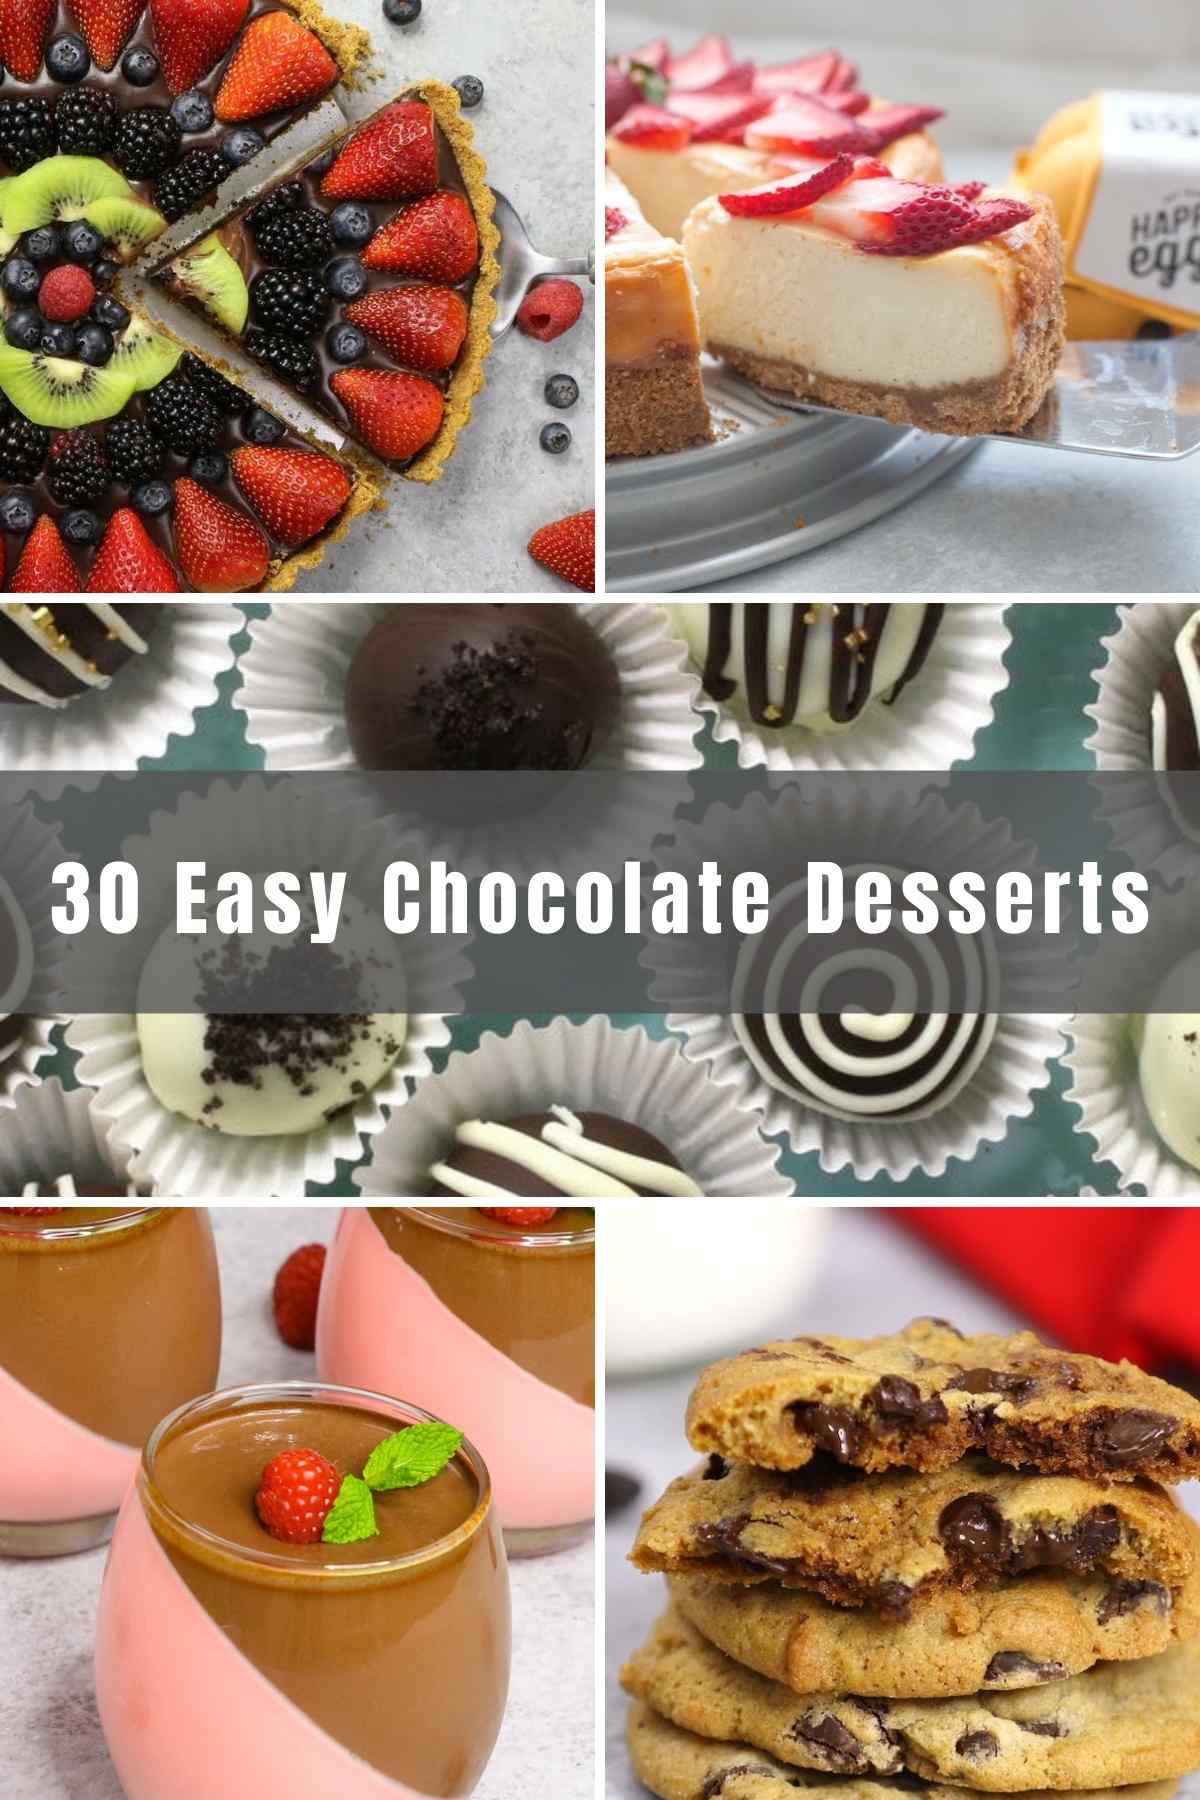 We’ve collected 30 of the best Chocolate Desserts that are easy to make at home and great for special occasions like Valentine’s Day or Mother’s Day. From chocolate chip cookies to no-bake chocolate truffles and everything in between, these delicious treats will satisfy your cocoa cravings!